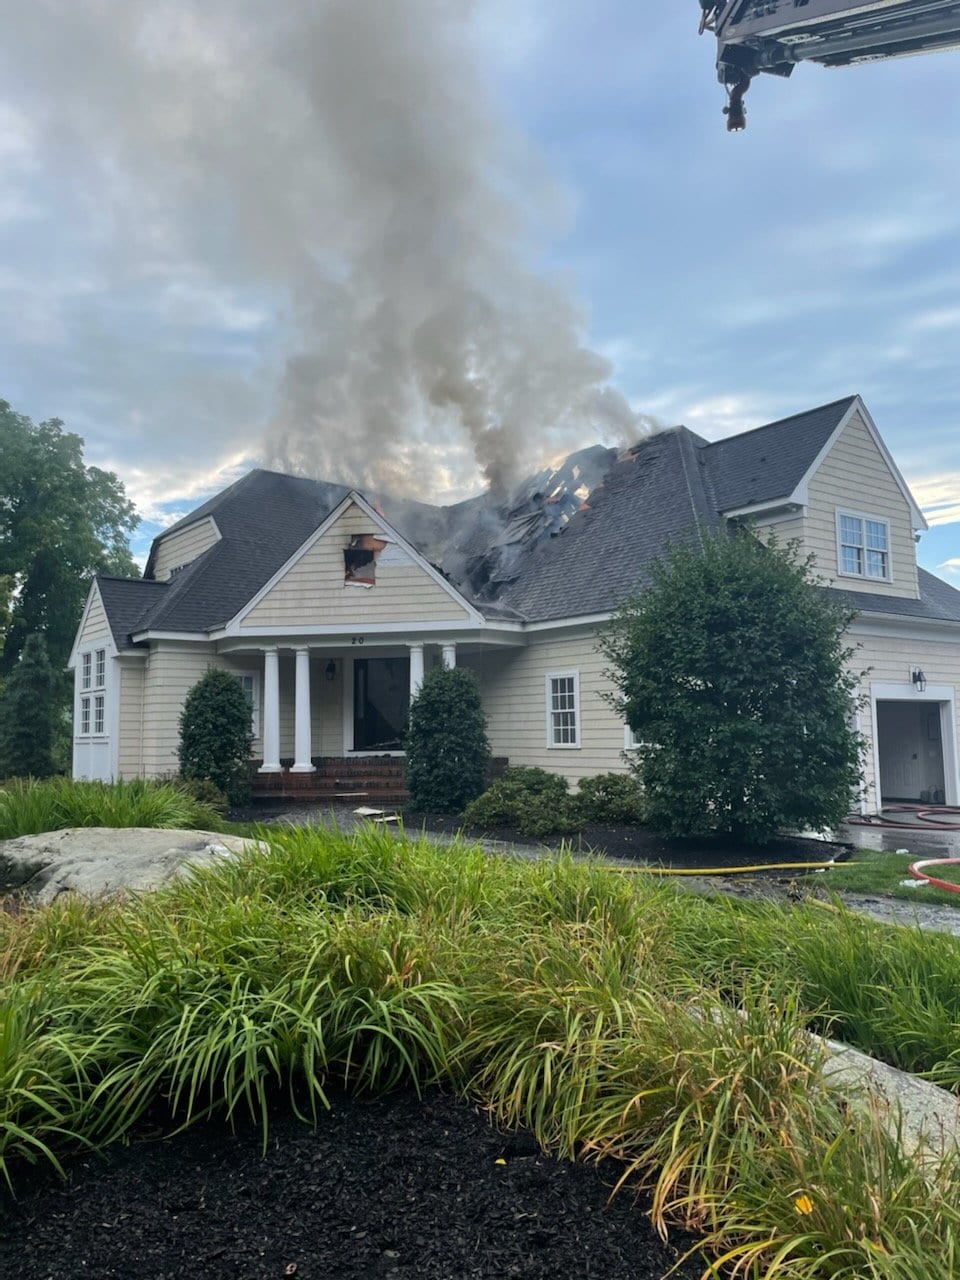 Storm leads to downed wires, fire in Southborough